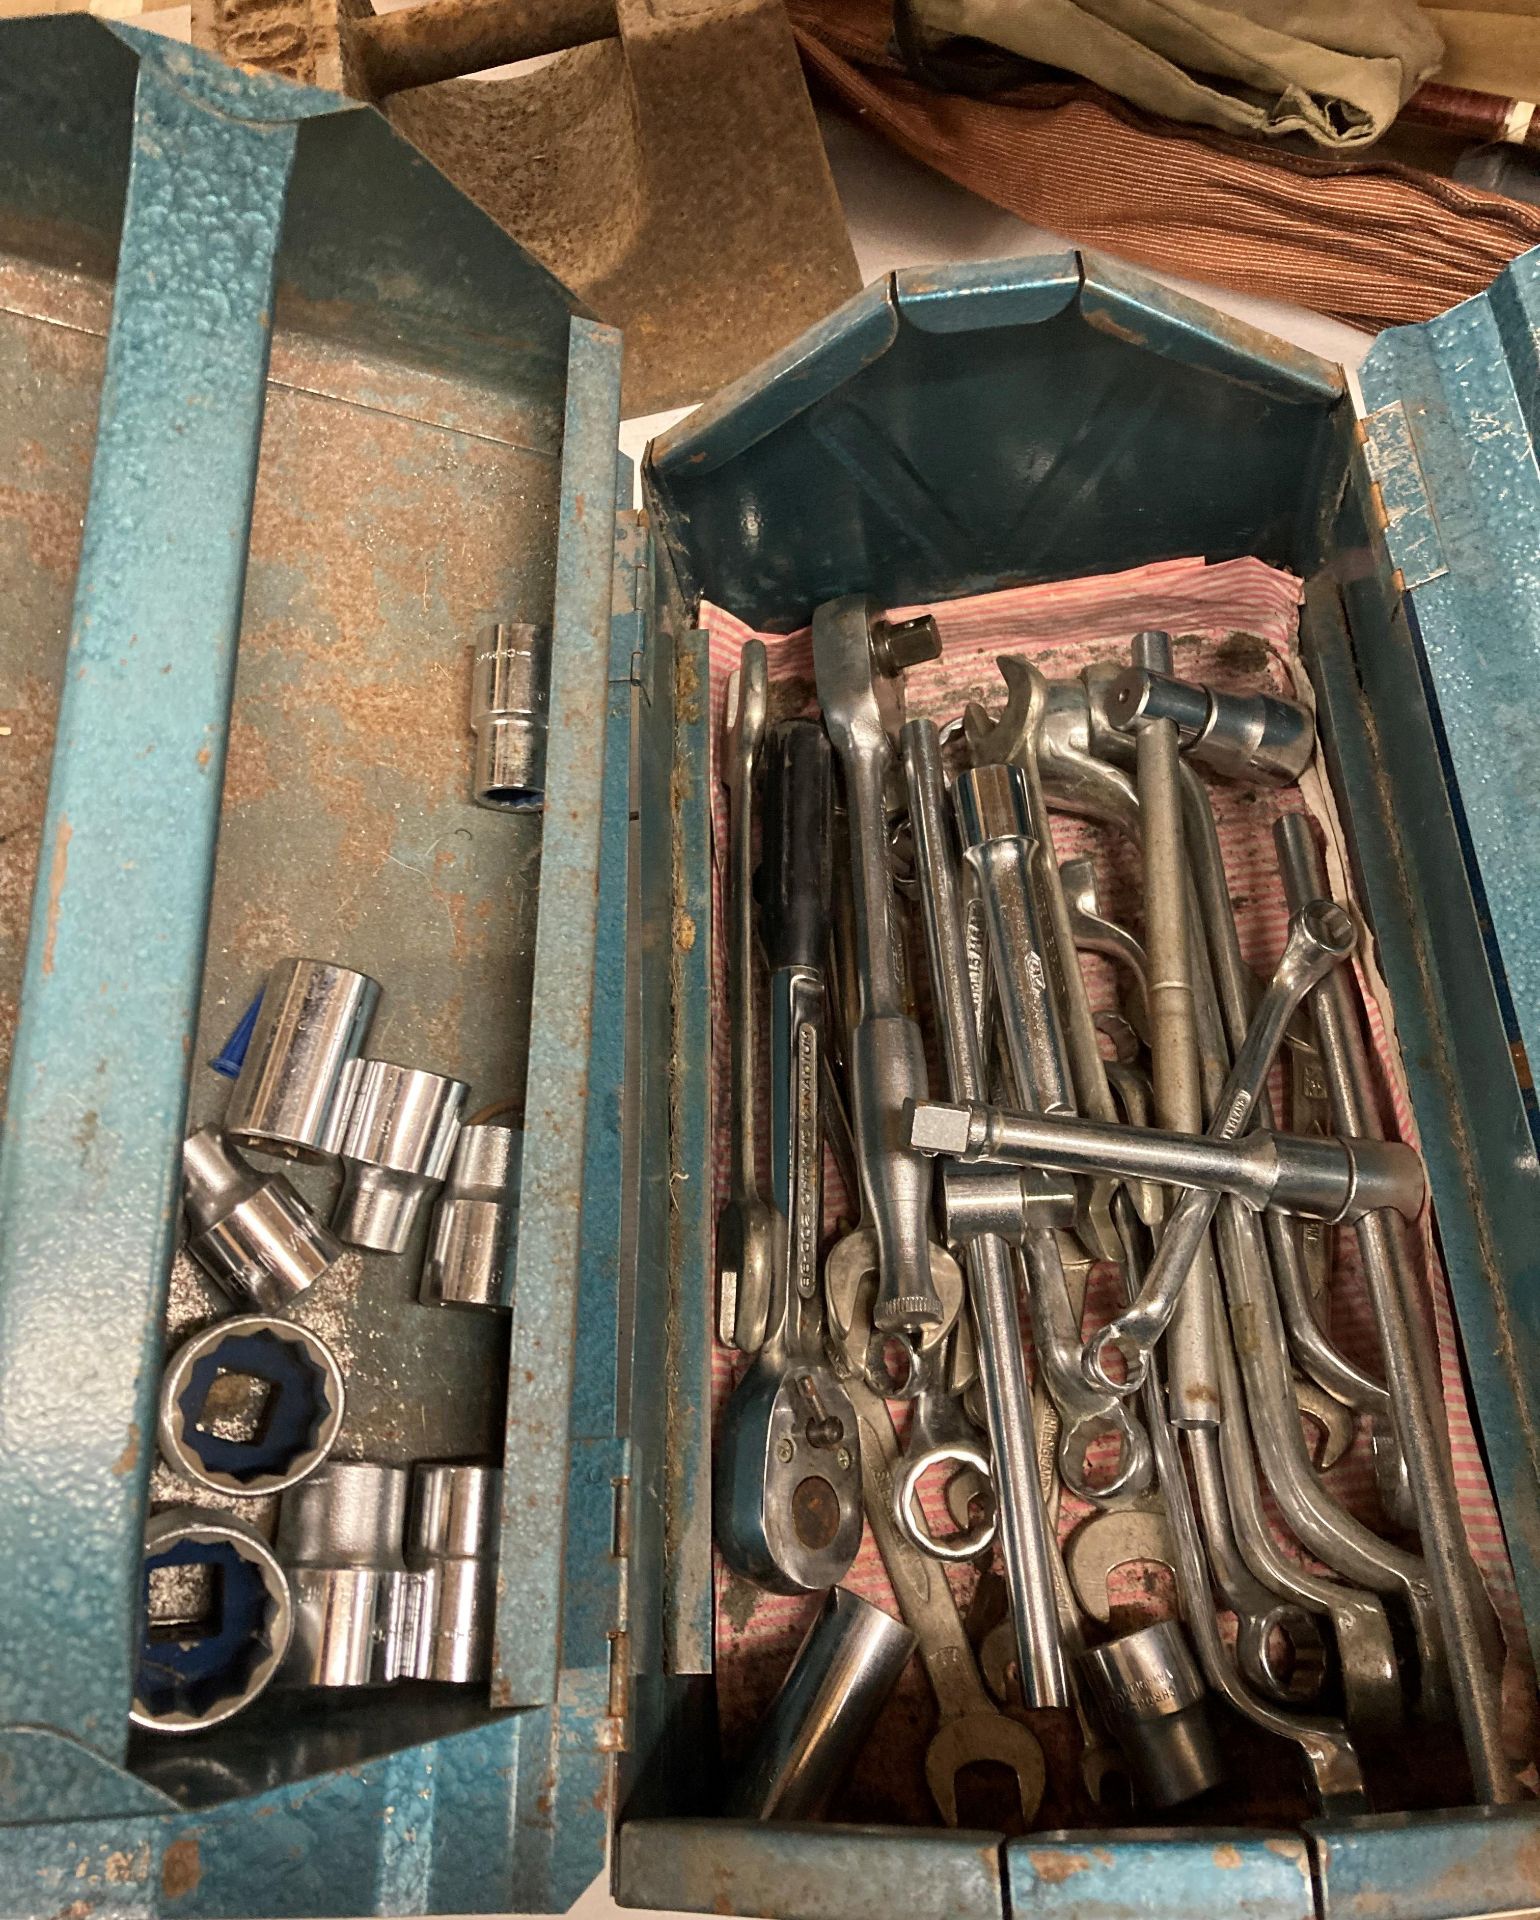 Contents to part of rack - two metal tool boxes and assorted hand tools, box saw, bit and brace, - Image 3 of 5